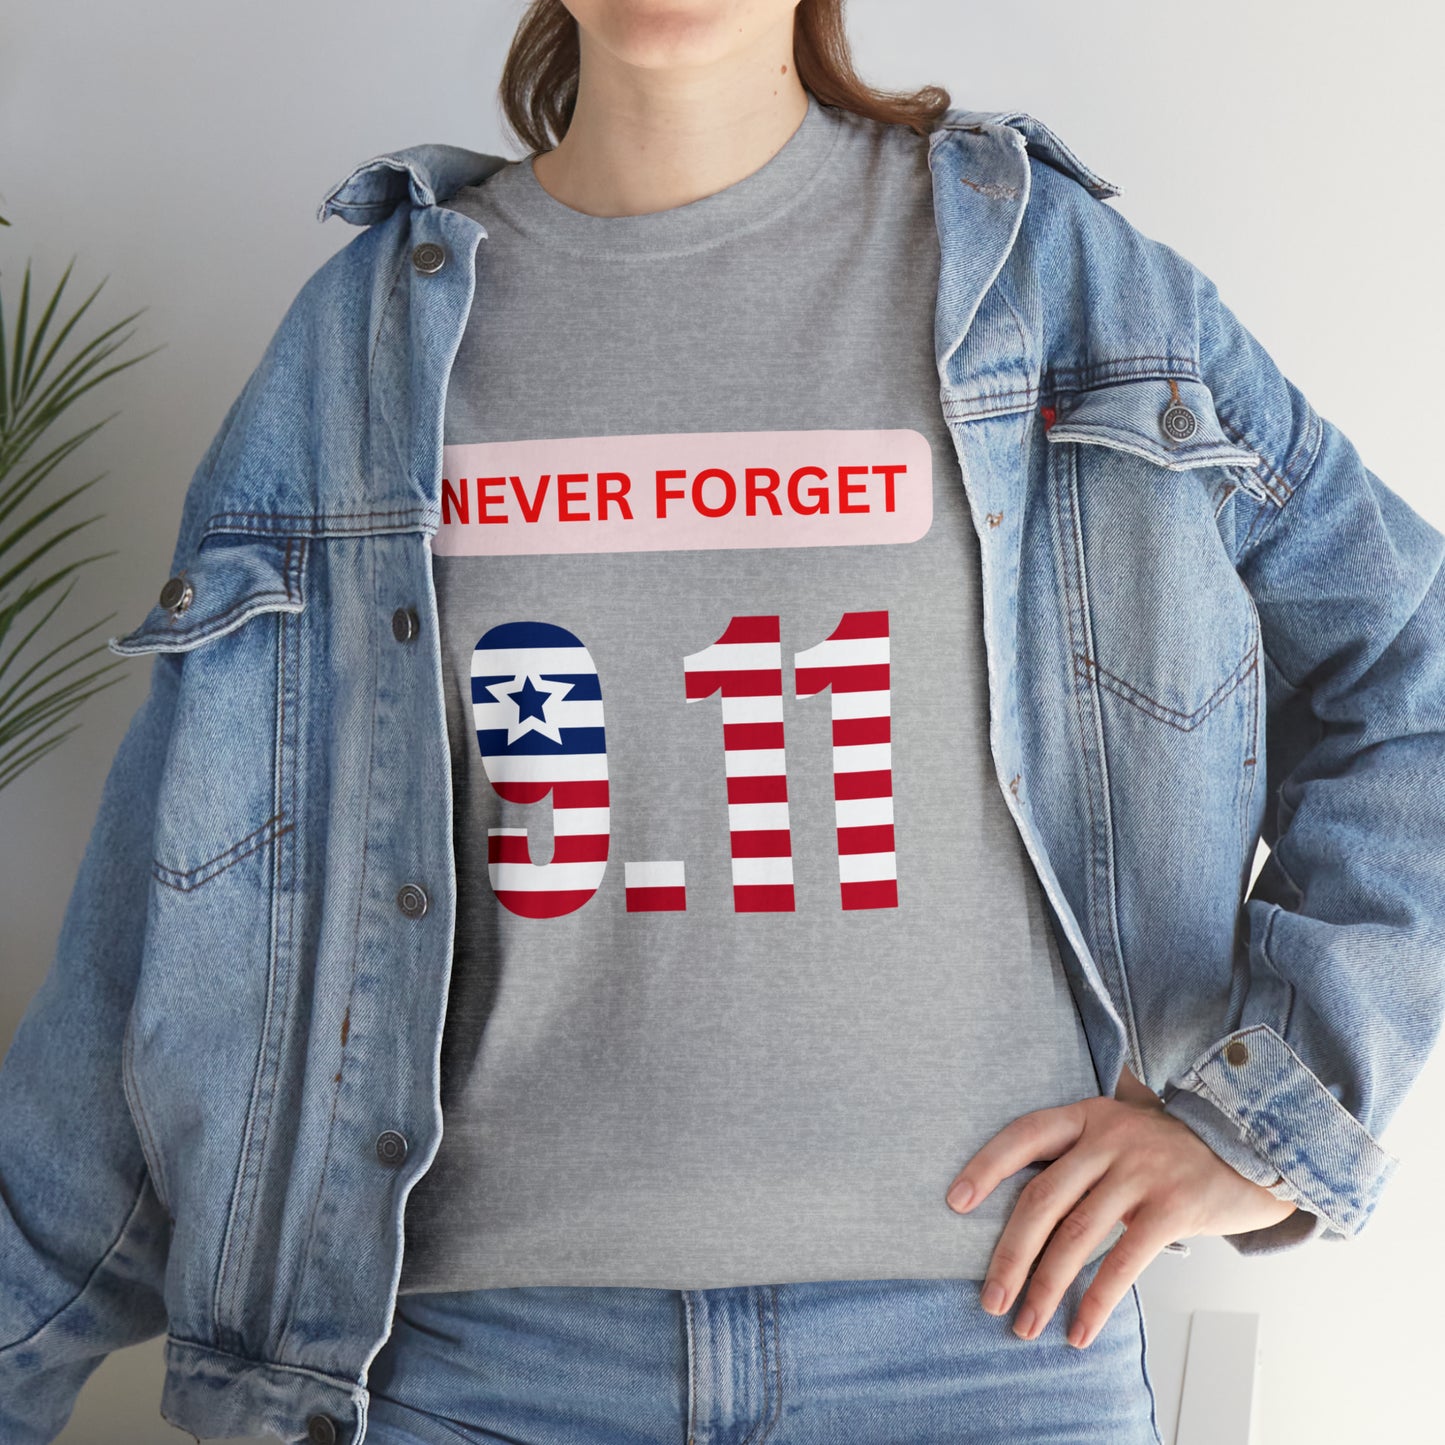 Unisex Heavy Cotton Tee - Never Forget 9/11